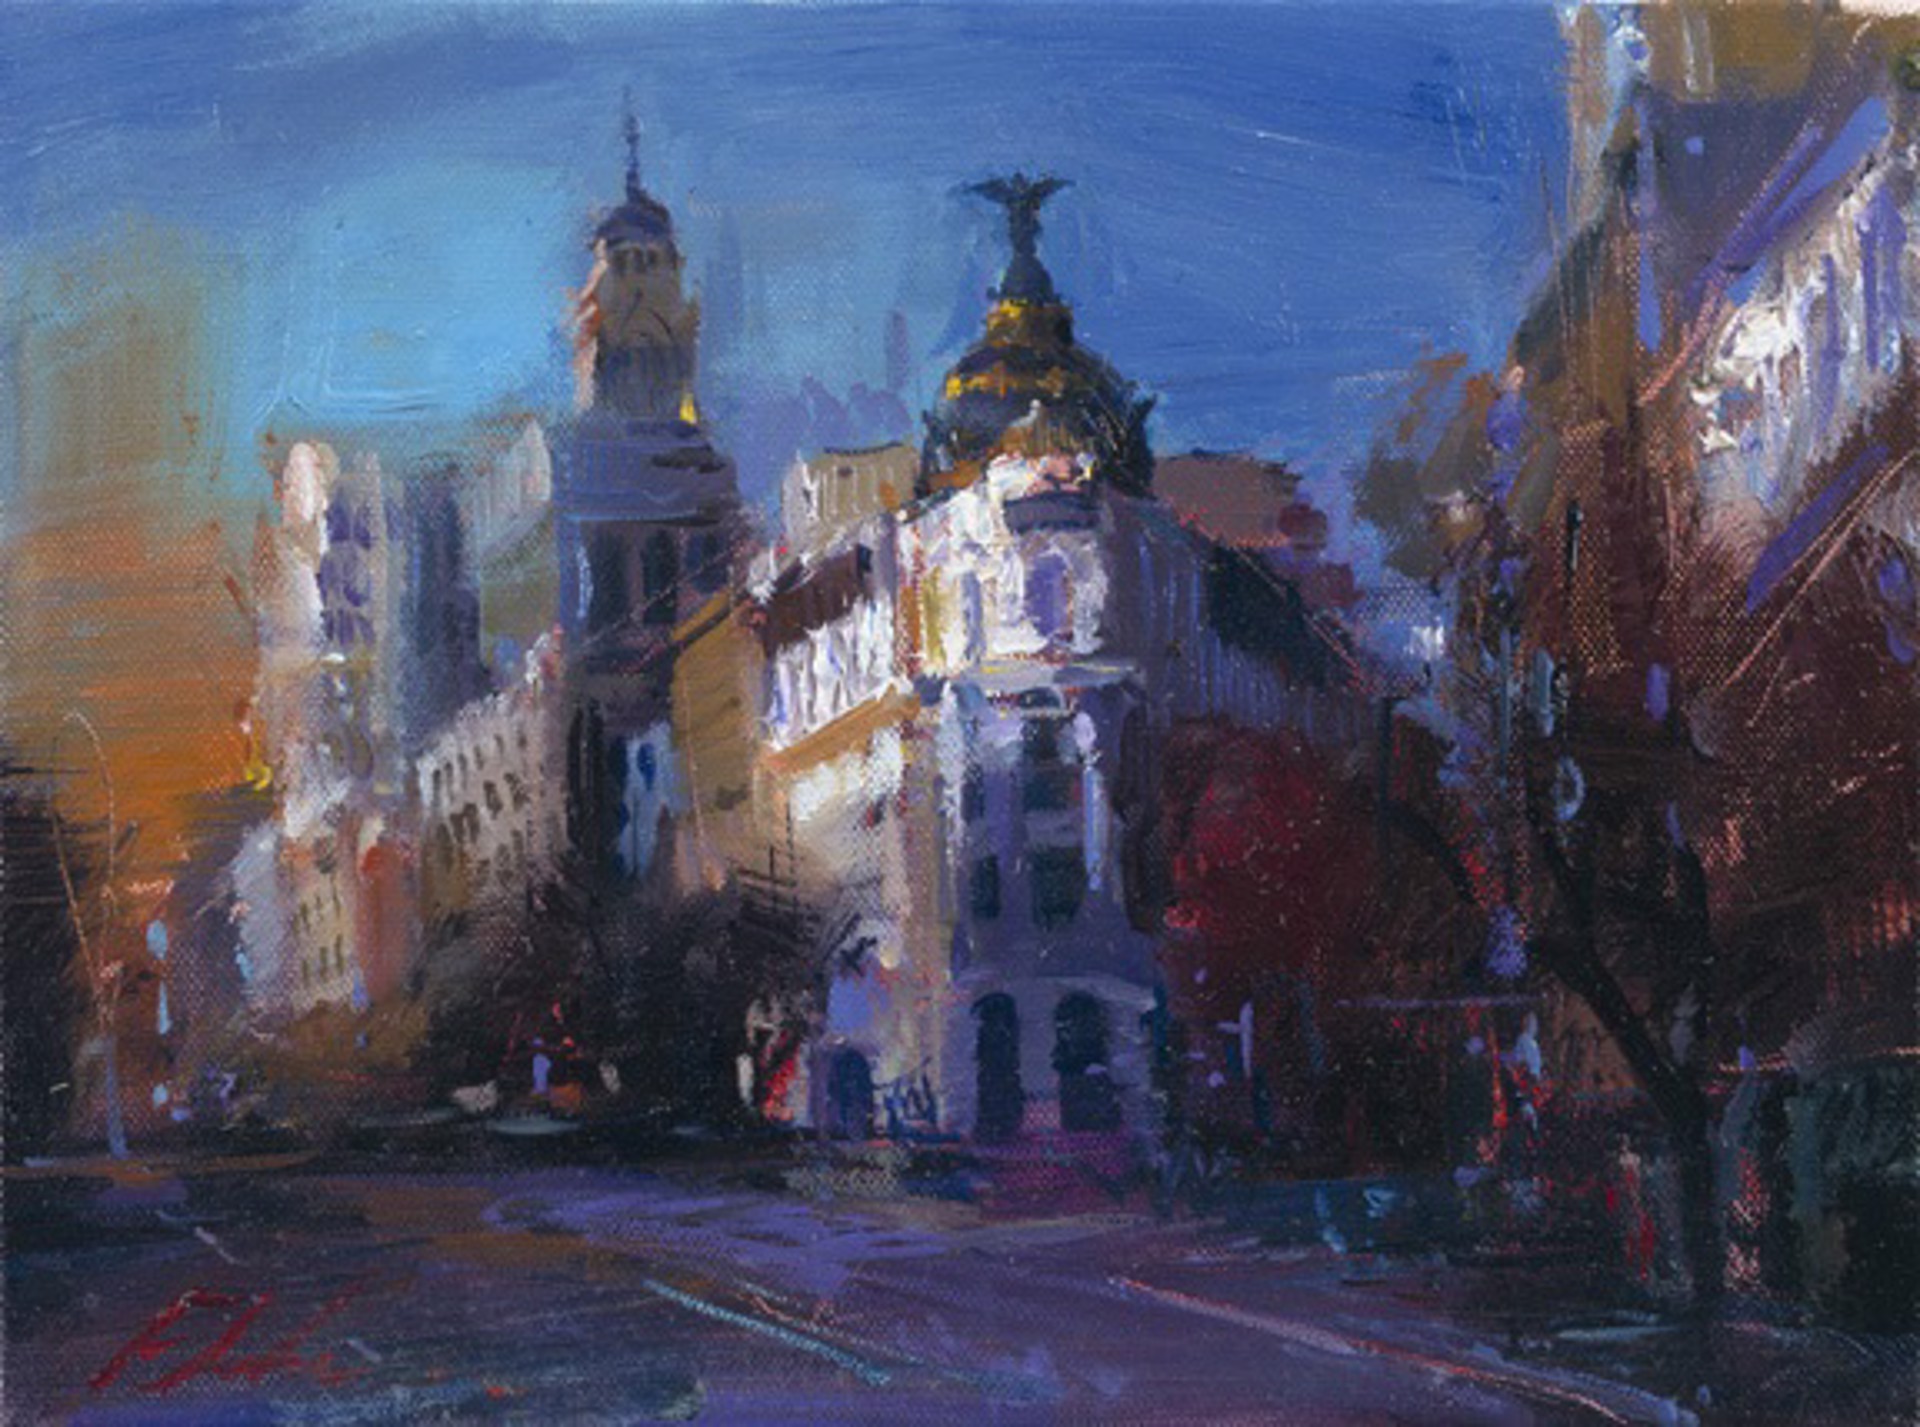 Dreams Of Madrid Postcards From Around the World by Michael Flohr